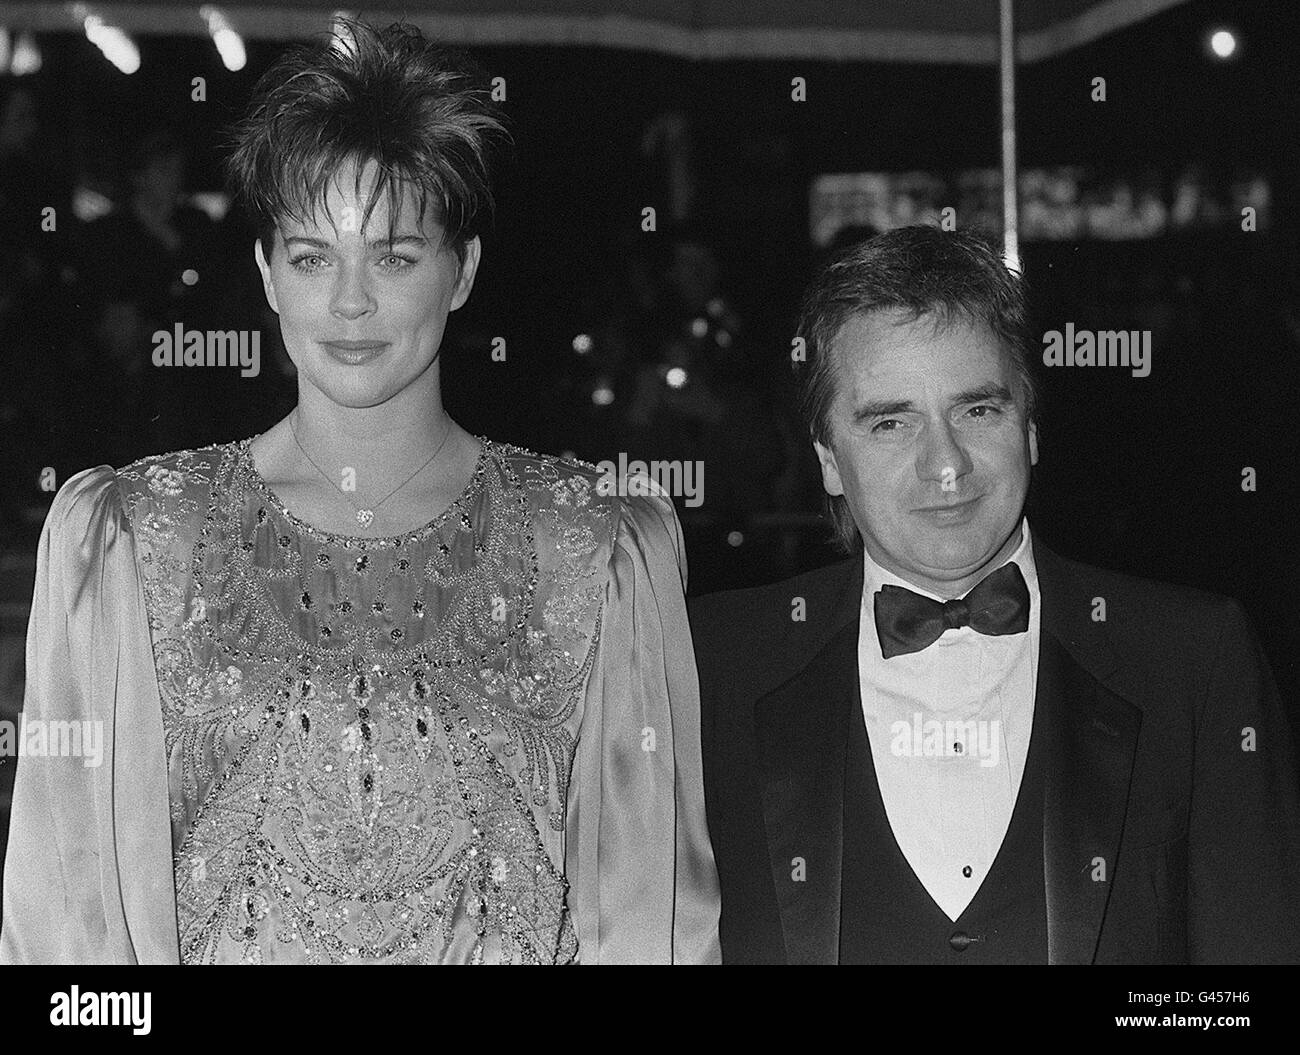 Comedian and actor Dudley Moore arrives with girlfriend Brogan Lane for the Royal premiere of his latest film 'Santa Claus - The Movie', attended by Diana, Princess of Wales, at the Empire Leicester Square in London. * Lane later became his third wife. 12/6/96: Moore has filed for divorce from his fourth wife, Nicole Rothschild, after just over two years of marriage. Stock Photo